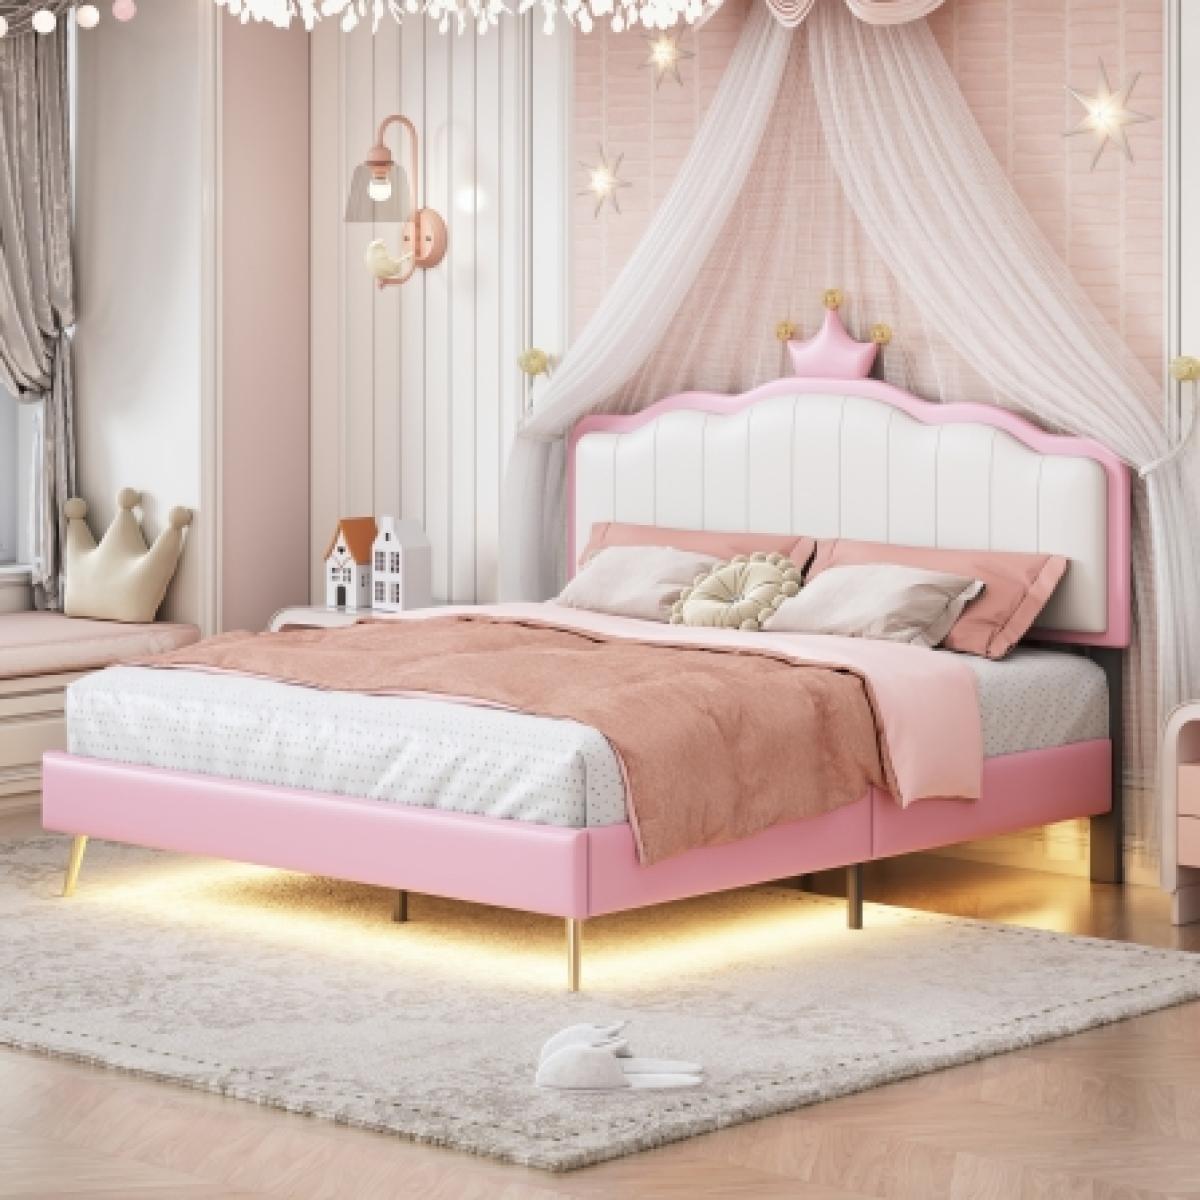 Full size Upholstered Princess Bed With Crown Headboard,Full Size Platform Bed with Headboard and Footboard with Light Strips,Golden Metal Legs, White+Pink